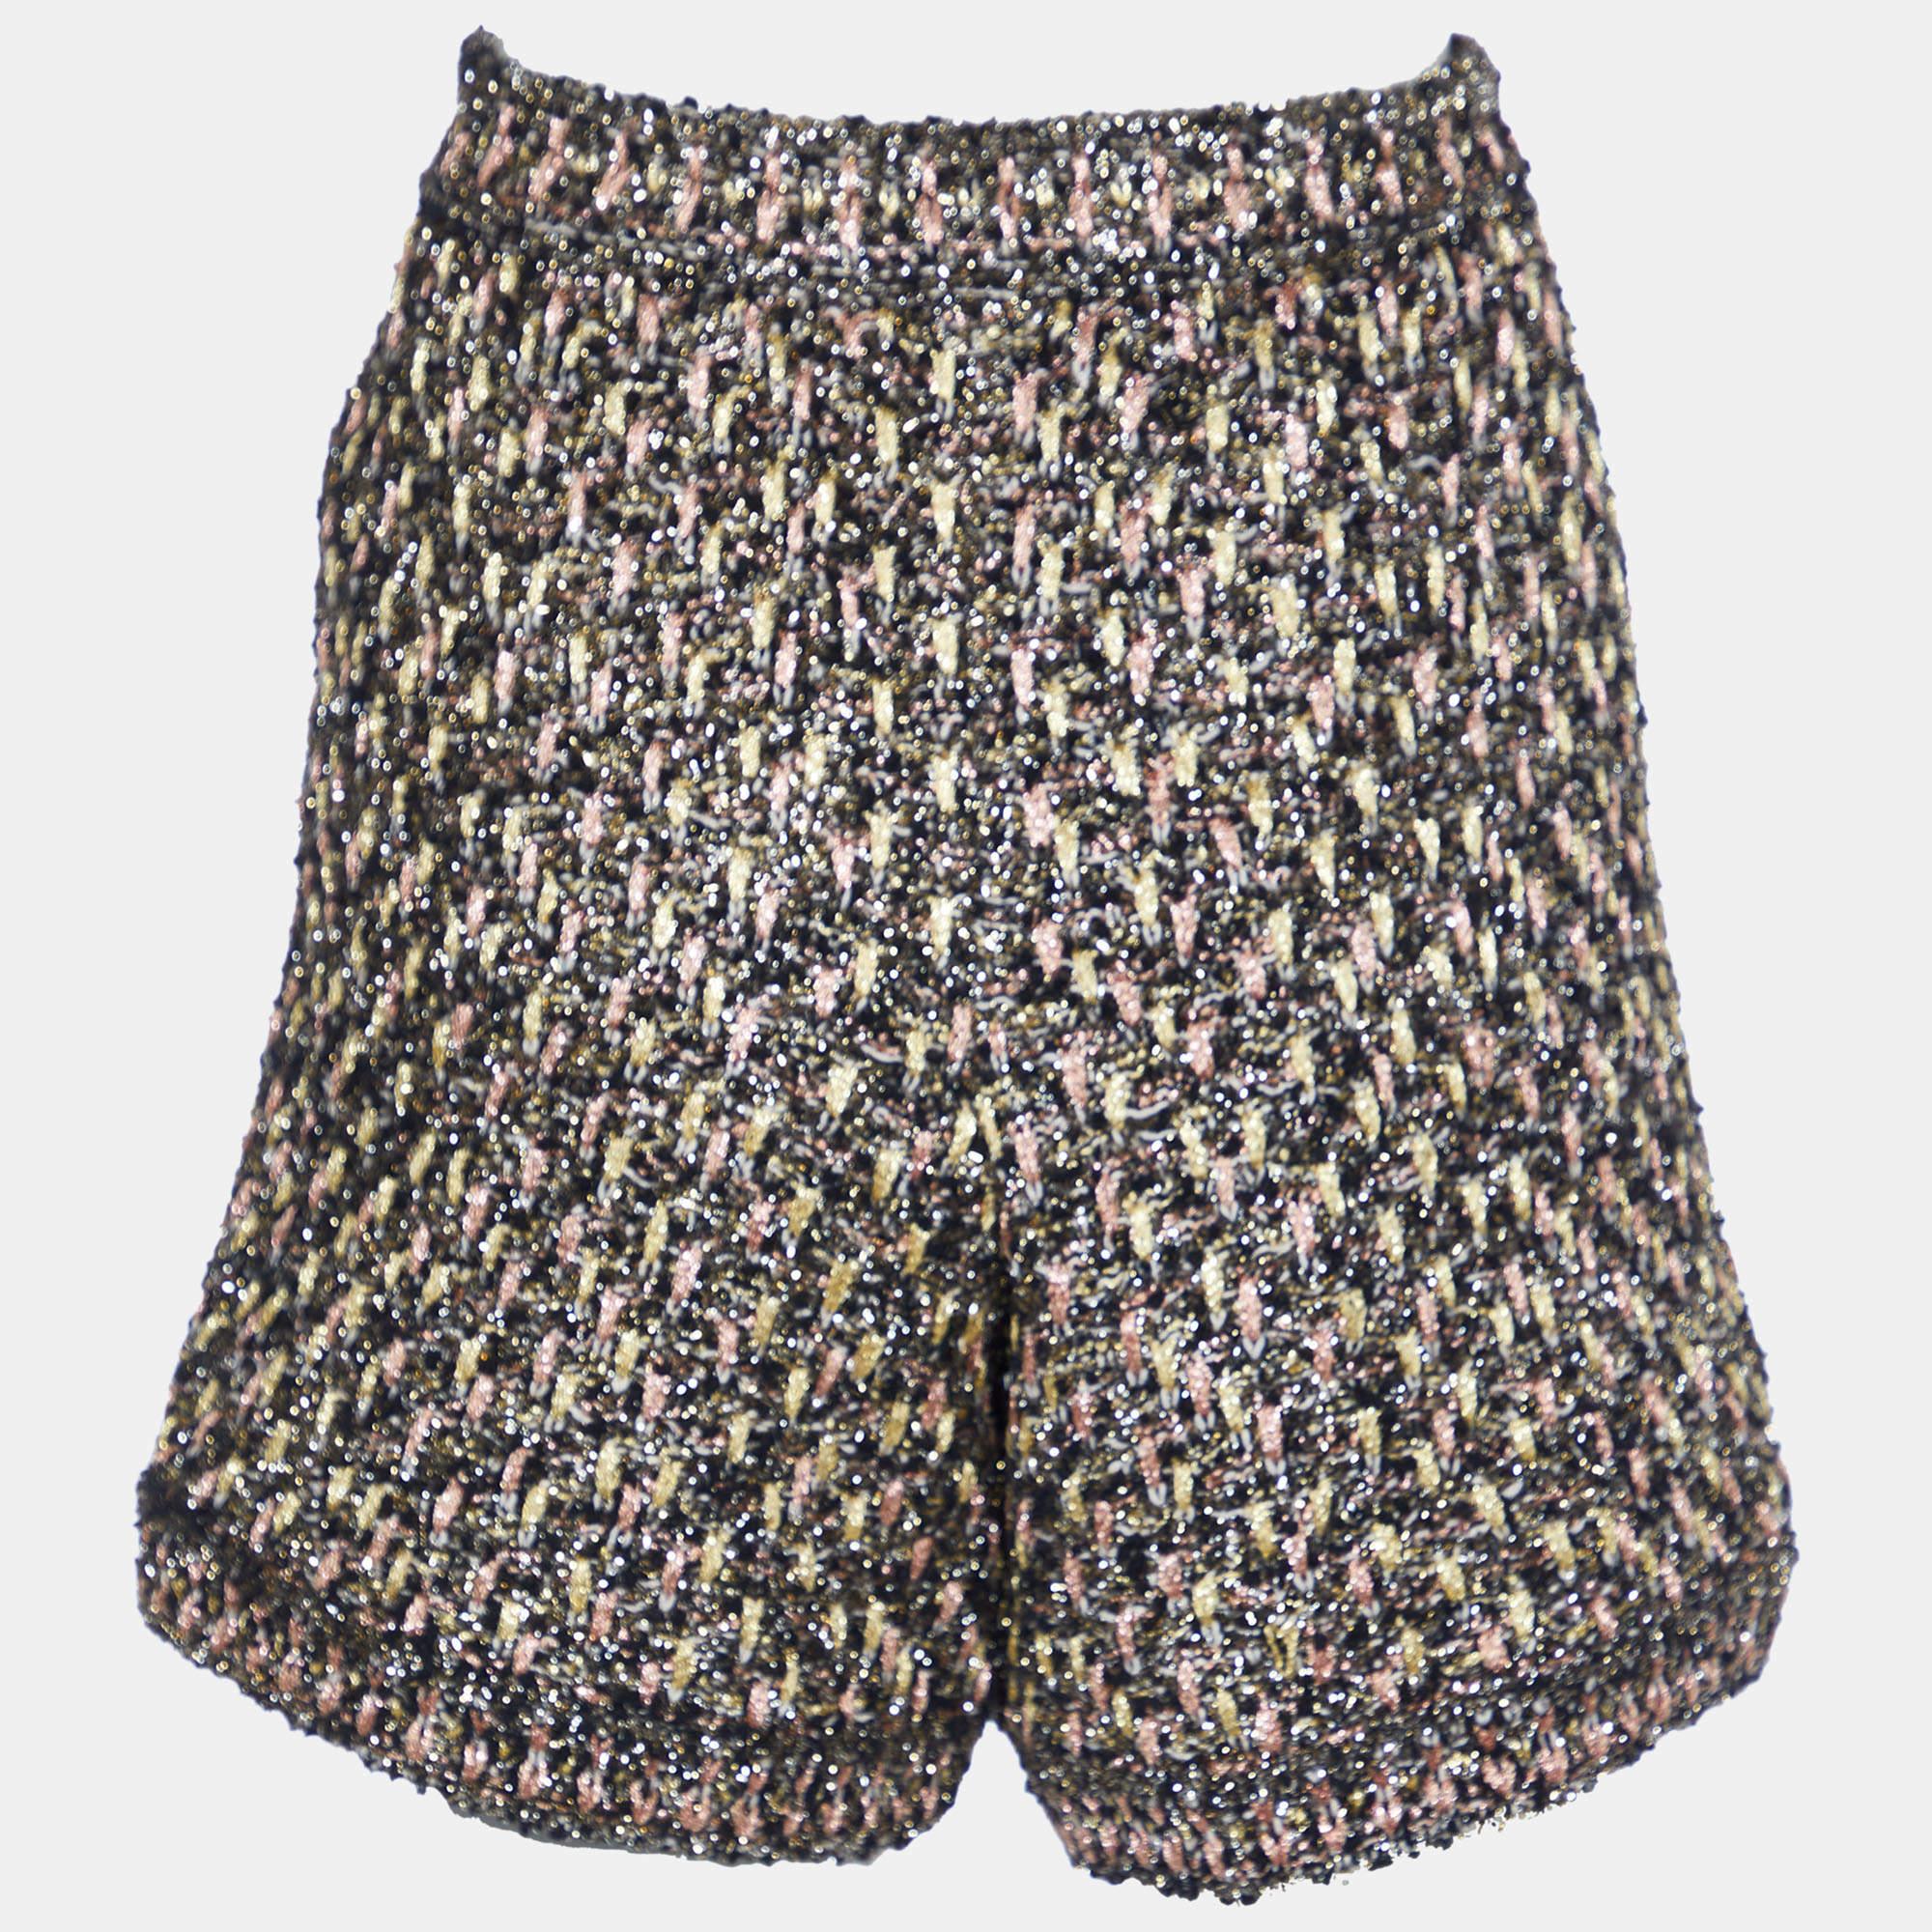 Beachy vacations call for a stylish pair of shorts like this. Stitched using high-quality fabric, this pair of shorts is styled with classic details and has a superb length. Wear it with T-shirts.

Includes: Brand tag, store tag